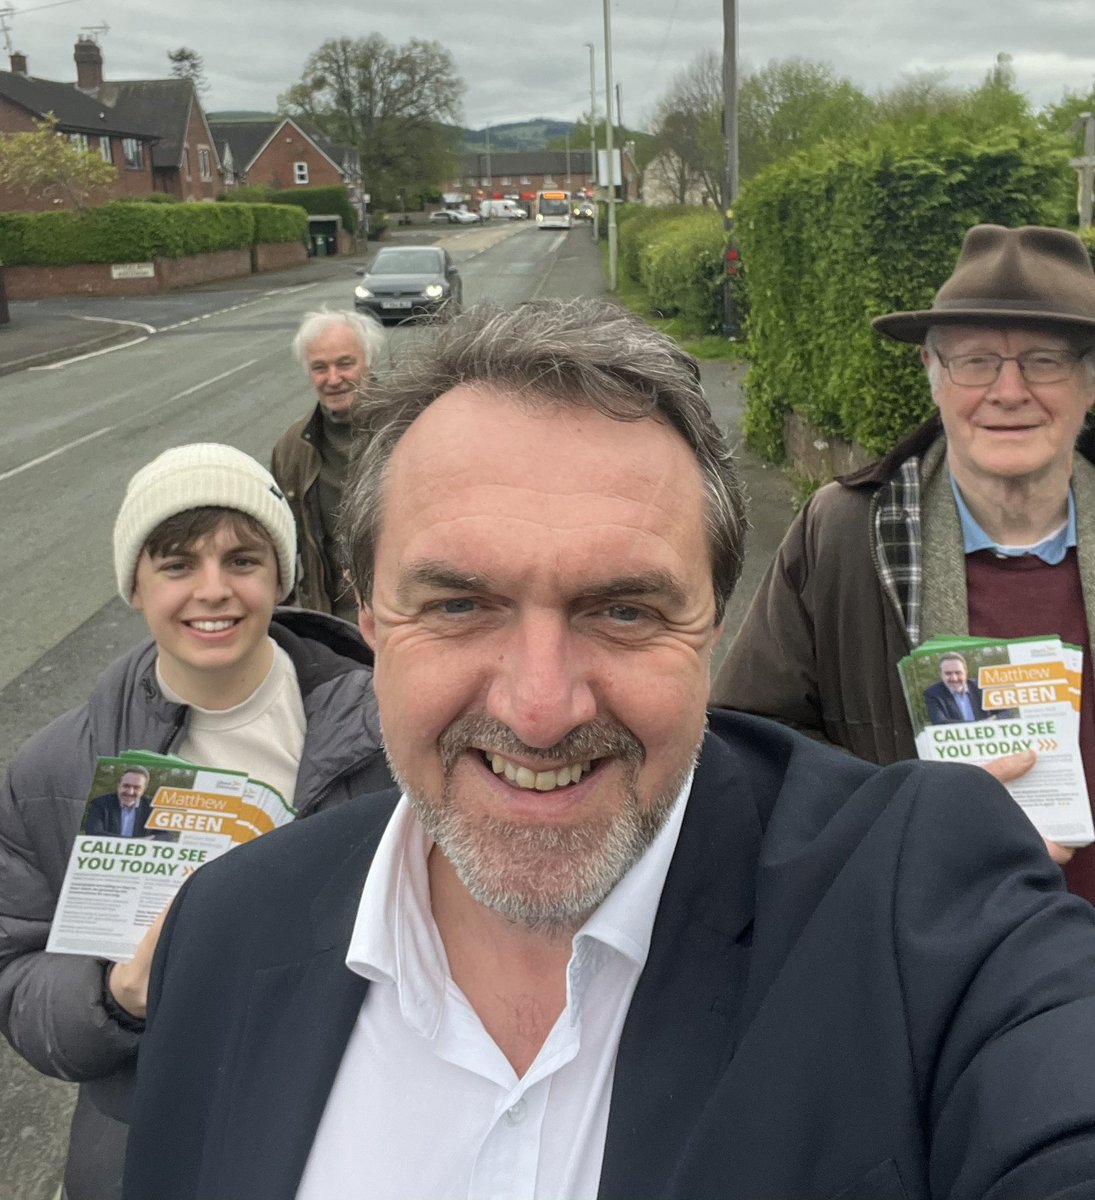 Excellent on doorsteps of #Ludlow tonight. Very flattering to find out just how many residents remember when I was local @LibDems MP. They told me they’re glad I’m standing again as they believe I can beat the Tories in #SouthShropshire & in doing so, help get Tories out of govt.